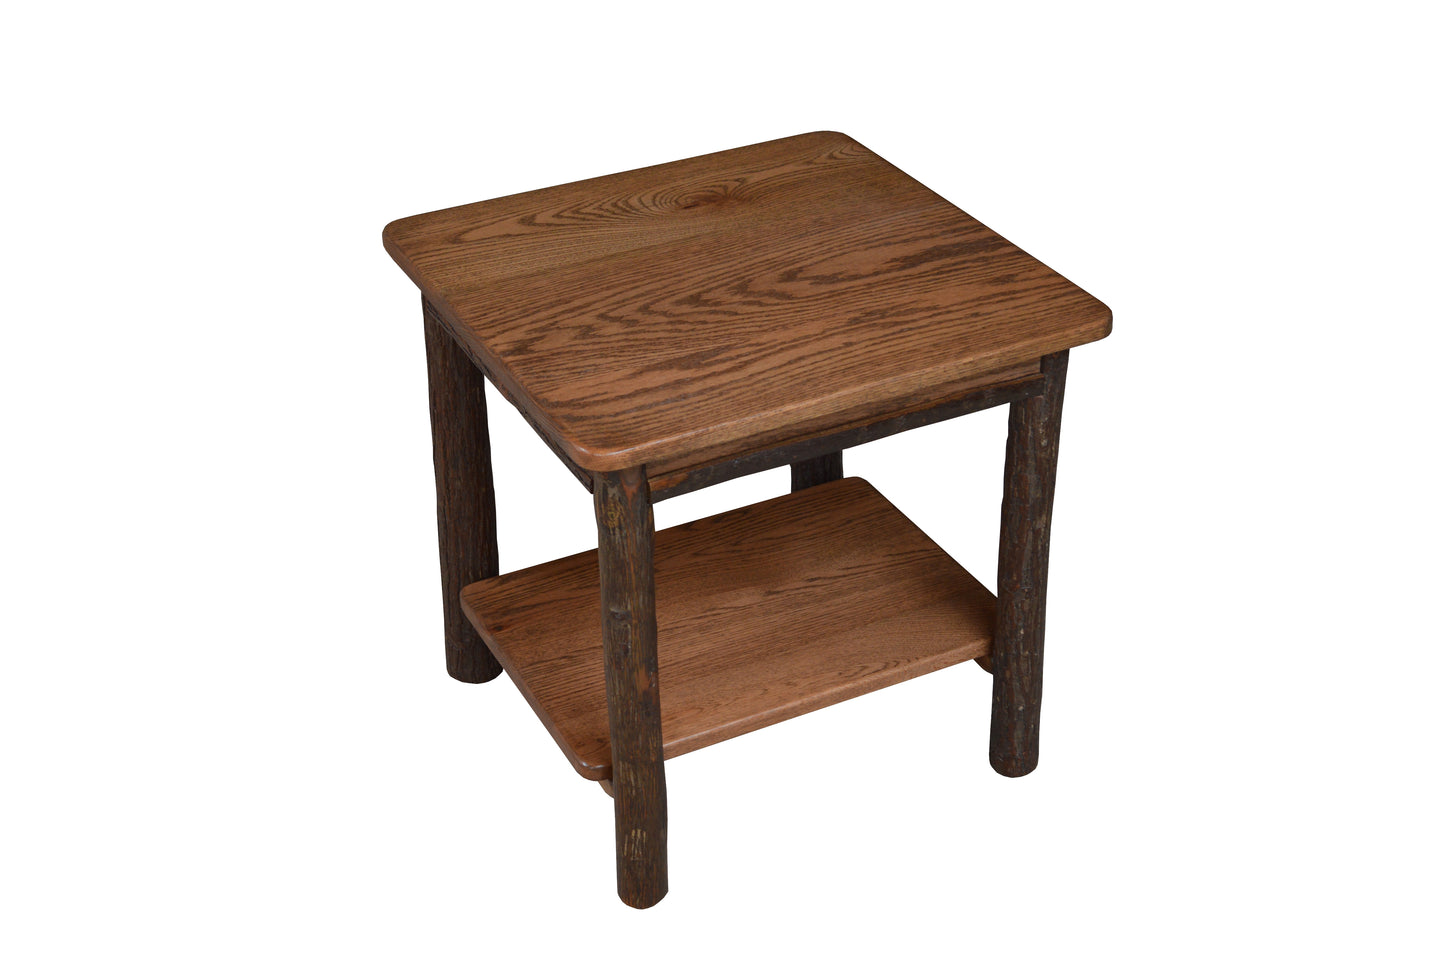 A&L Furniture Co. Hickory Solid Wood End Table with Shelf - LEAD TIME TO SHIP 10 BUSINESS DAYS